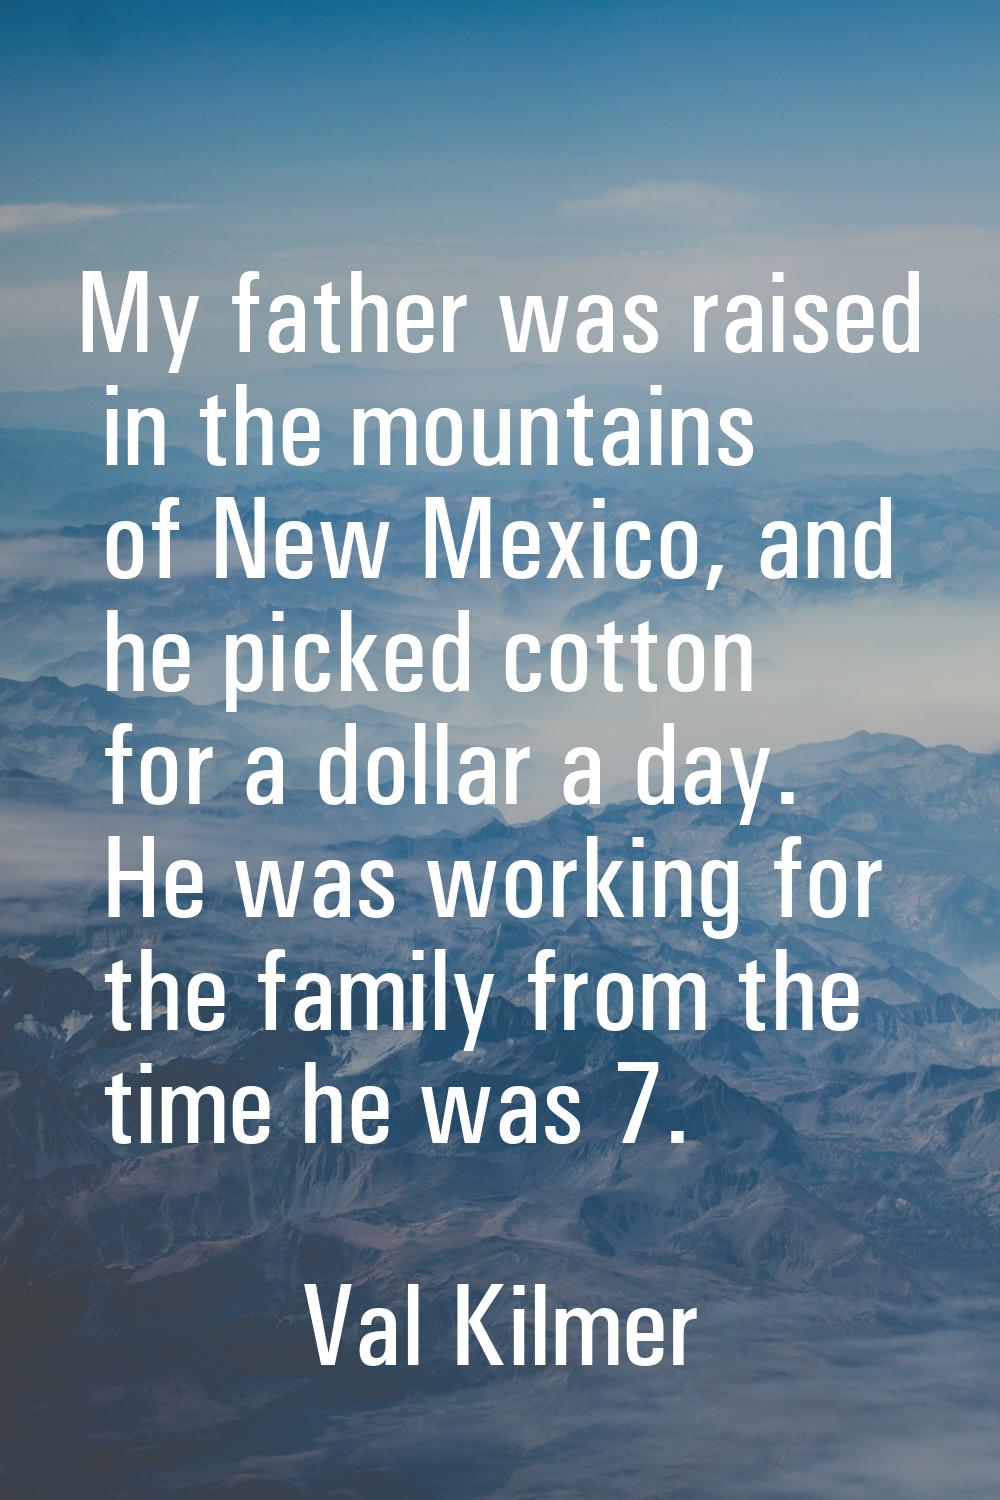 My father was raised in the mountains of New Mexico, and he picked cotton for a dollar a day. He wa